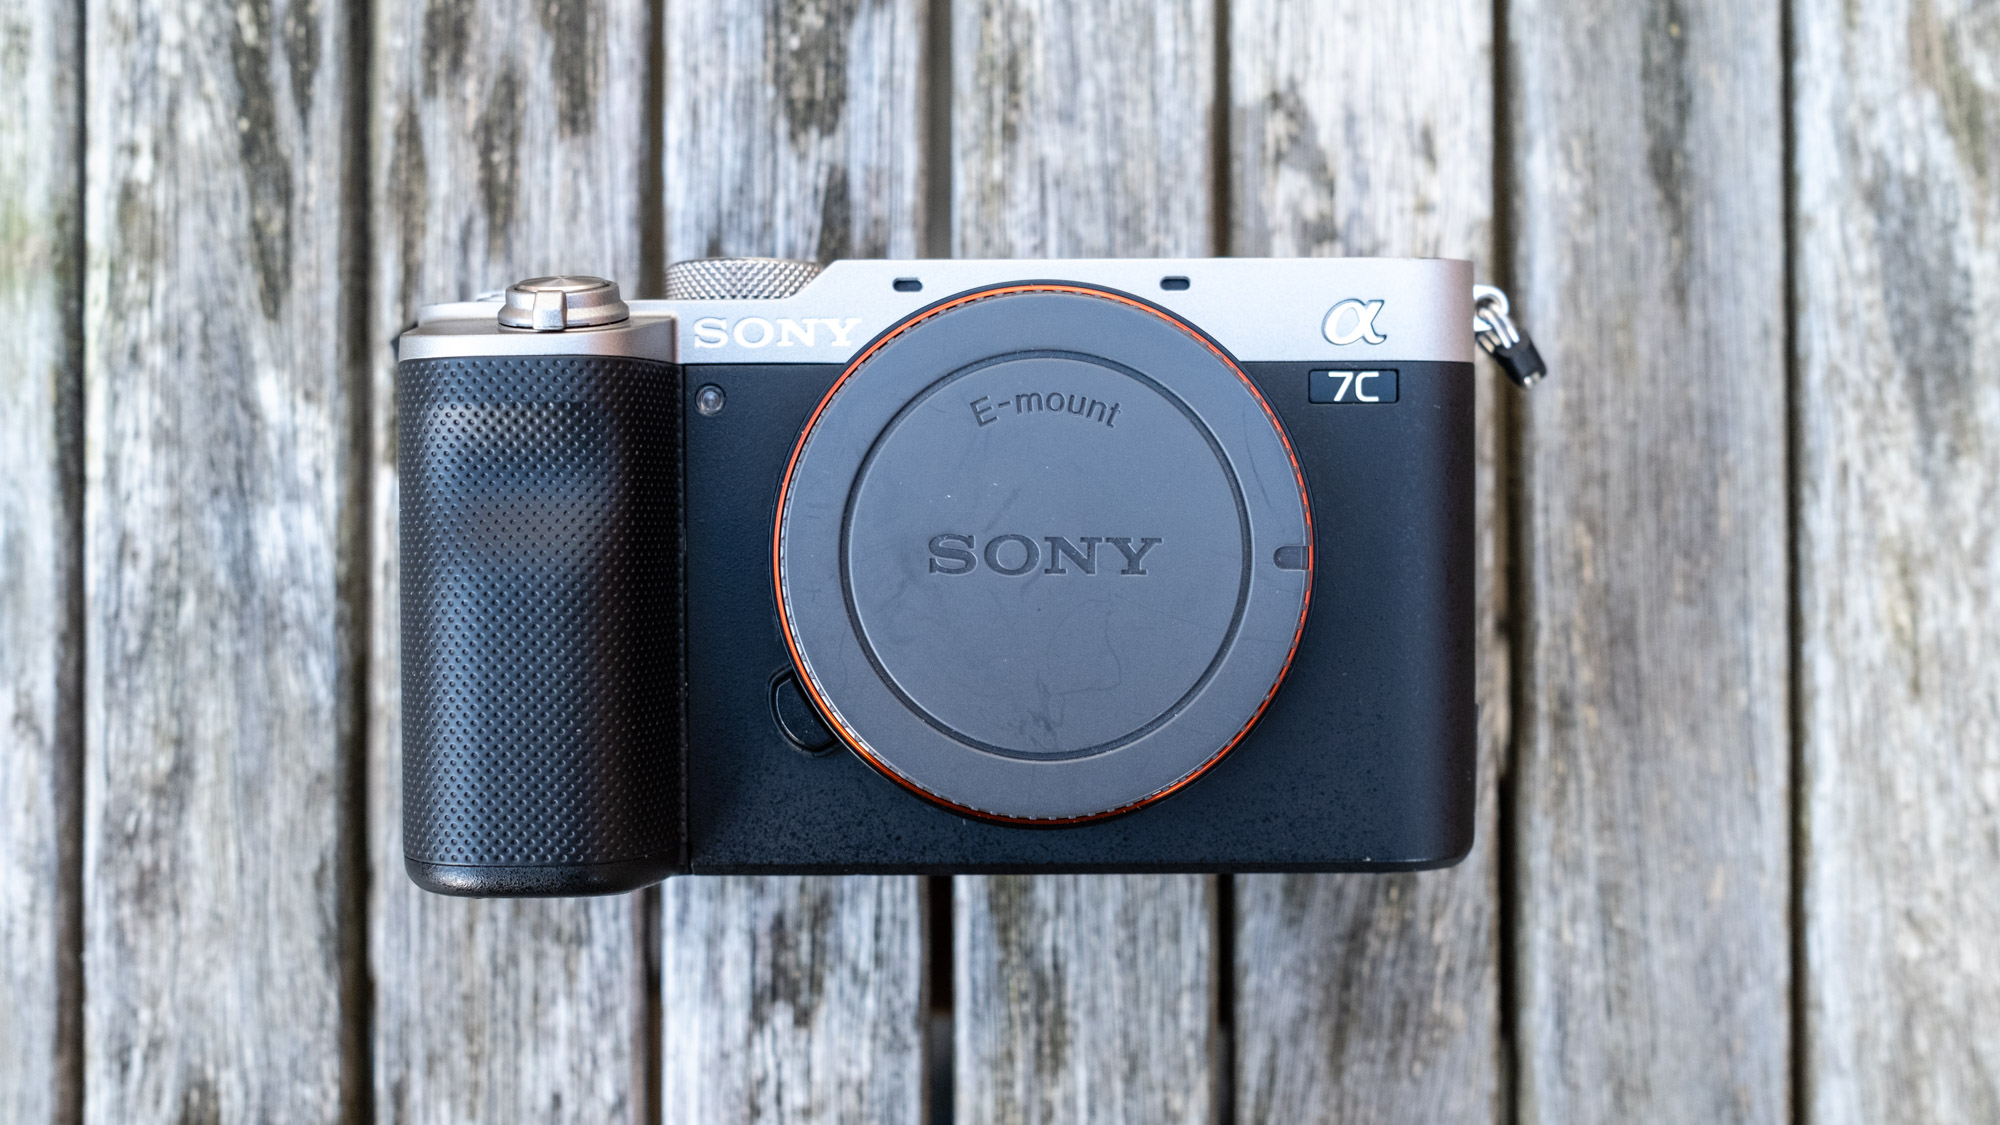 Sony A7C on top of a wooden table